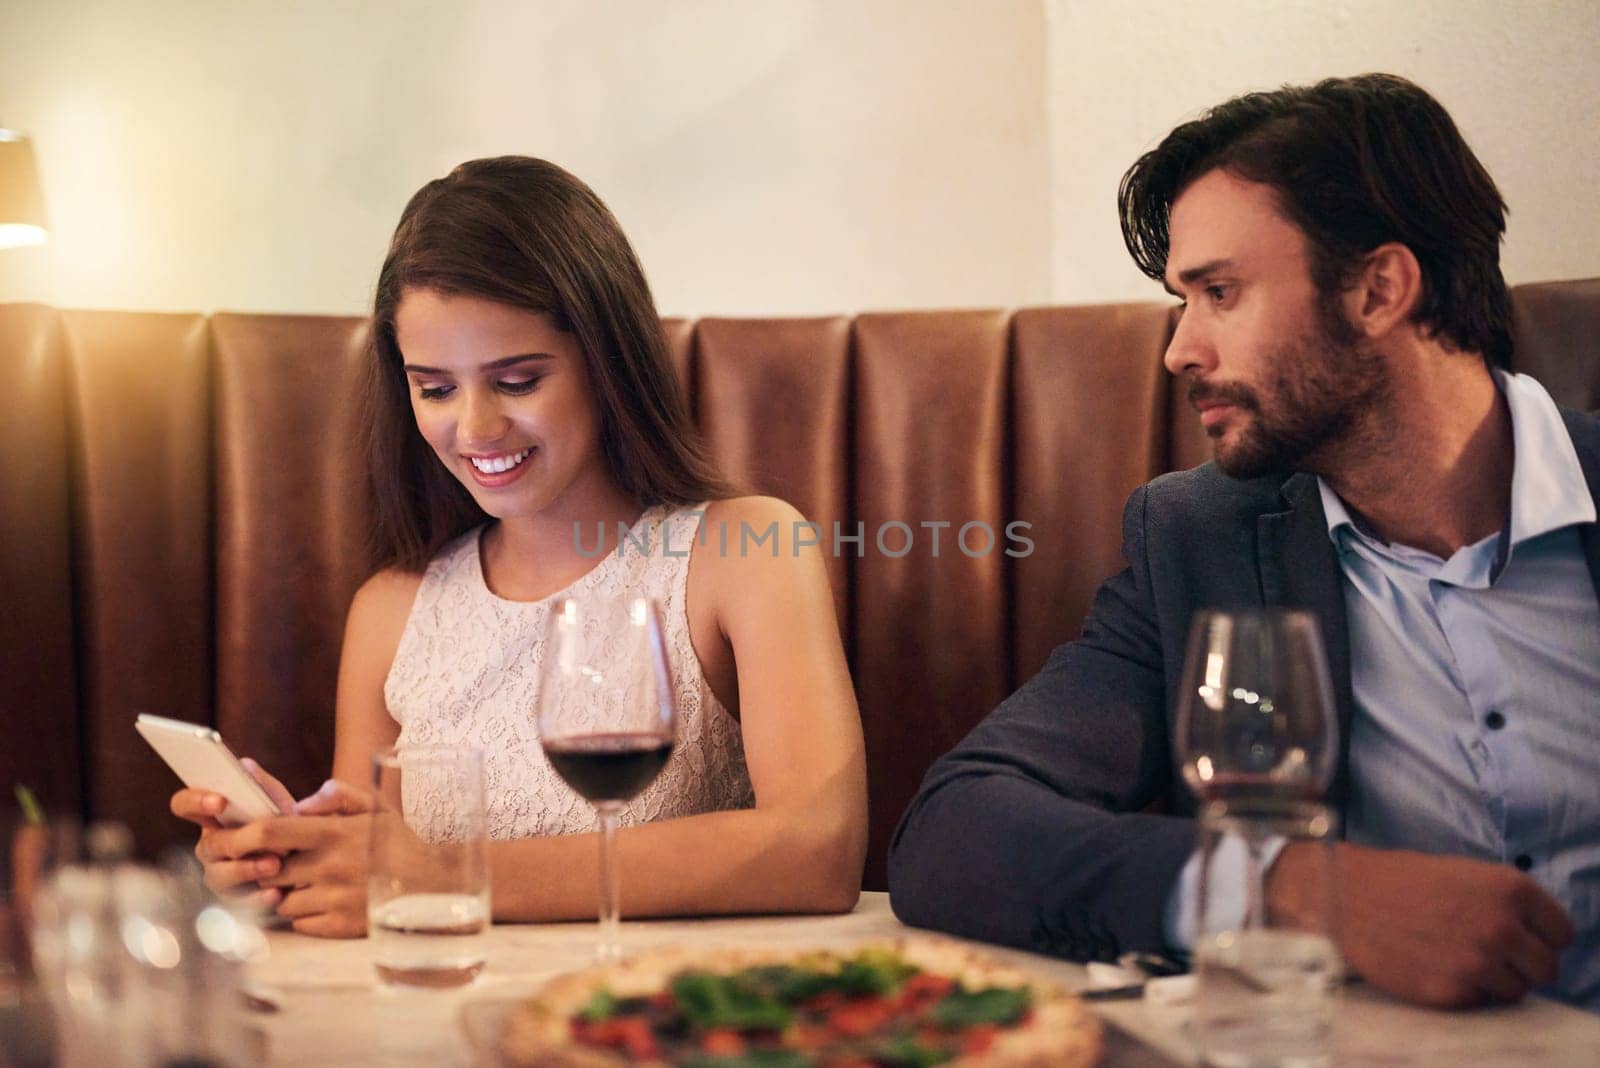 Cellphone, chatting and couple on a date at a restaurant for valentines day, romance or anniversary. Communication, upset and annoyed man watching his happy girlfriend sitting on her phone at dinner